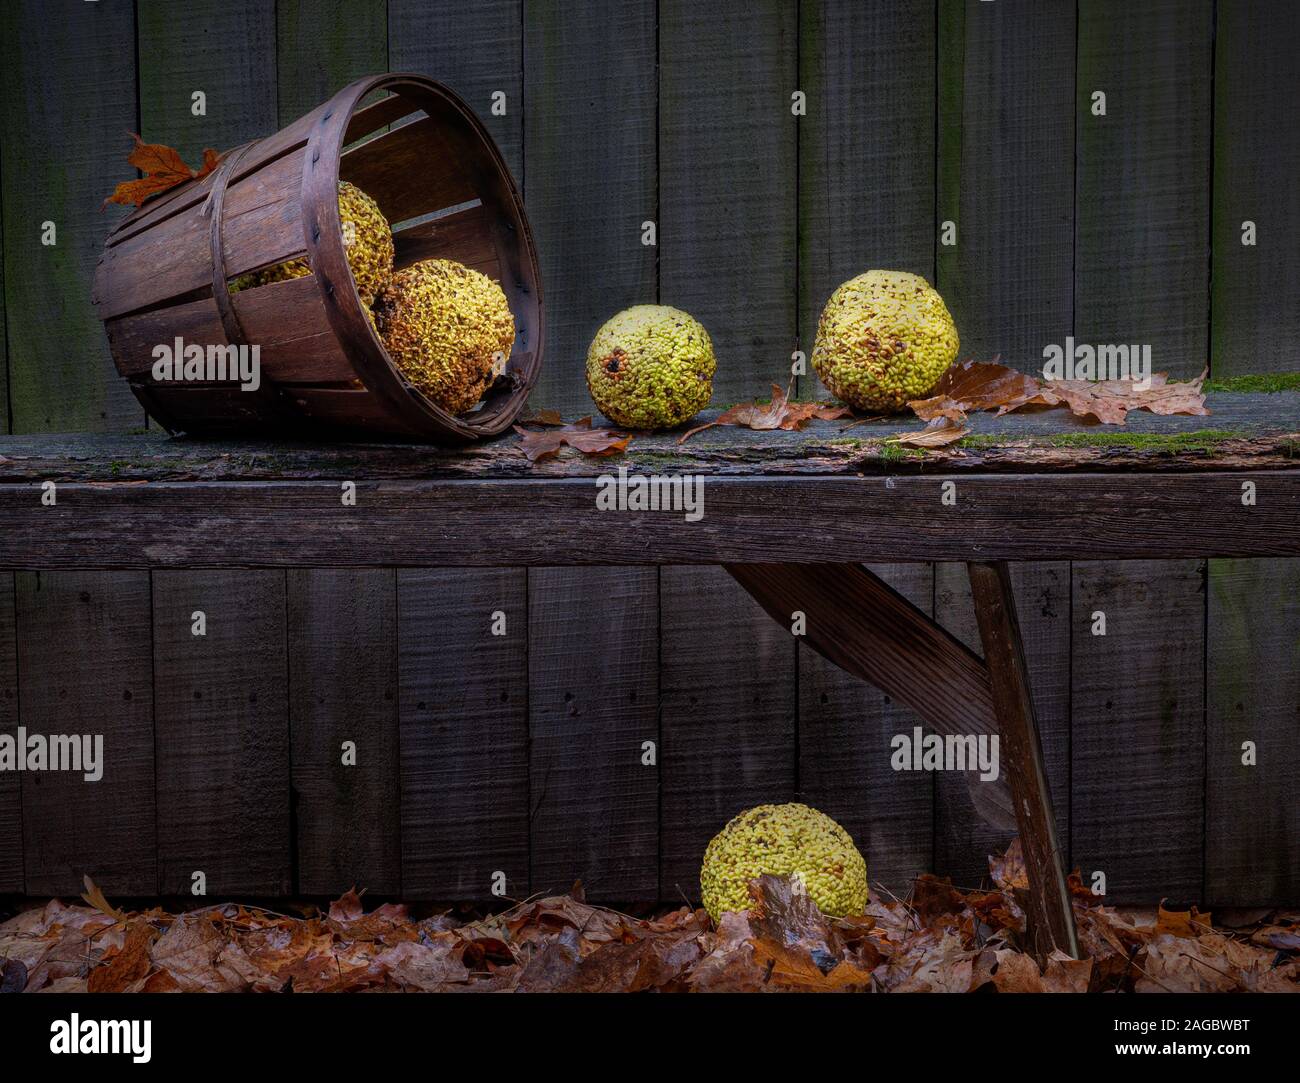 Spilled basket of Osage oranges on old bench in autumn. Osage oranges are the fruit of the tree Maclura pomifera. Stock Photo